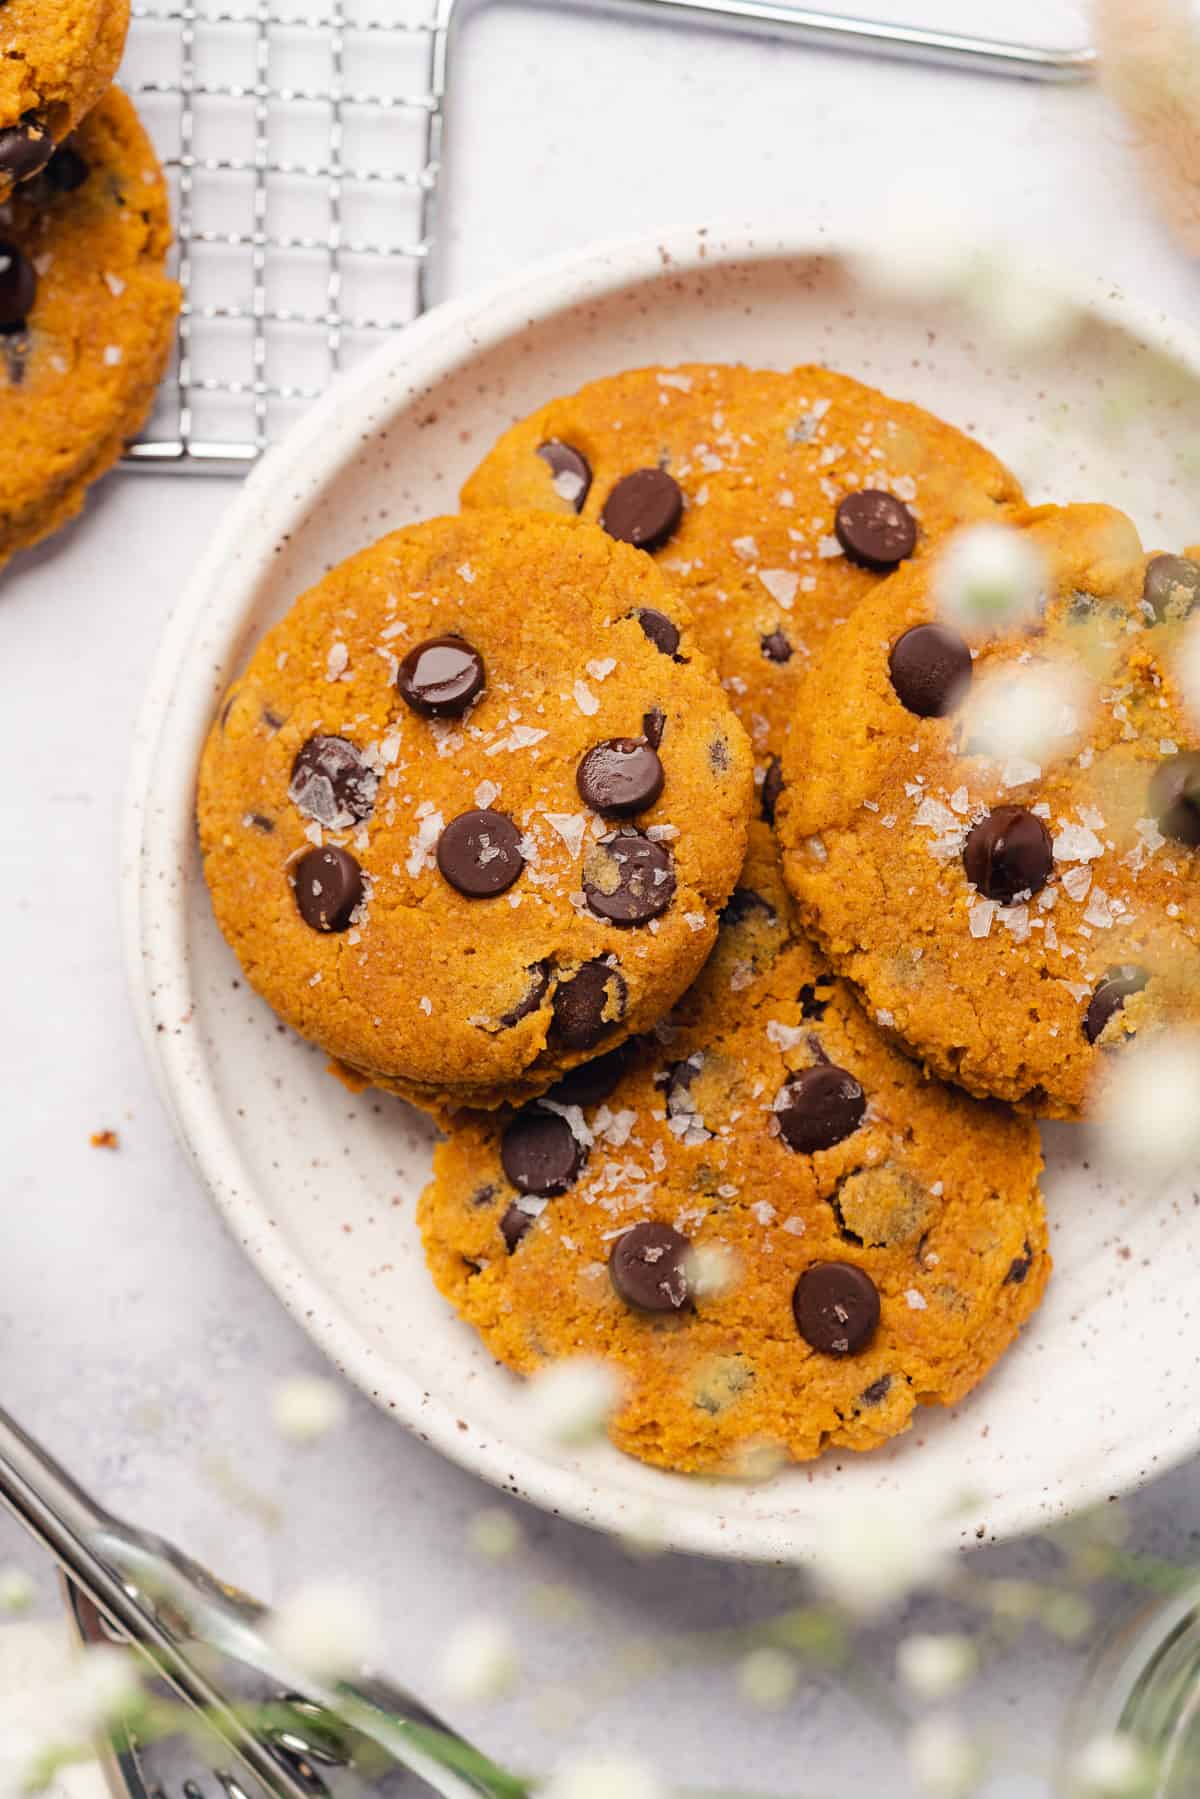 keto pumpkin chocoalte chip cookies on a plate with baby's breath flowers